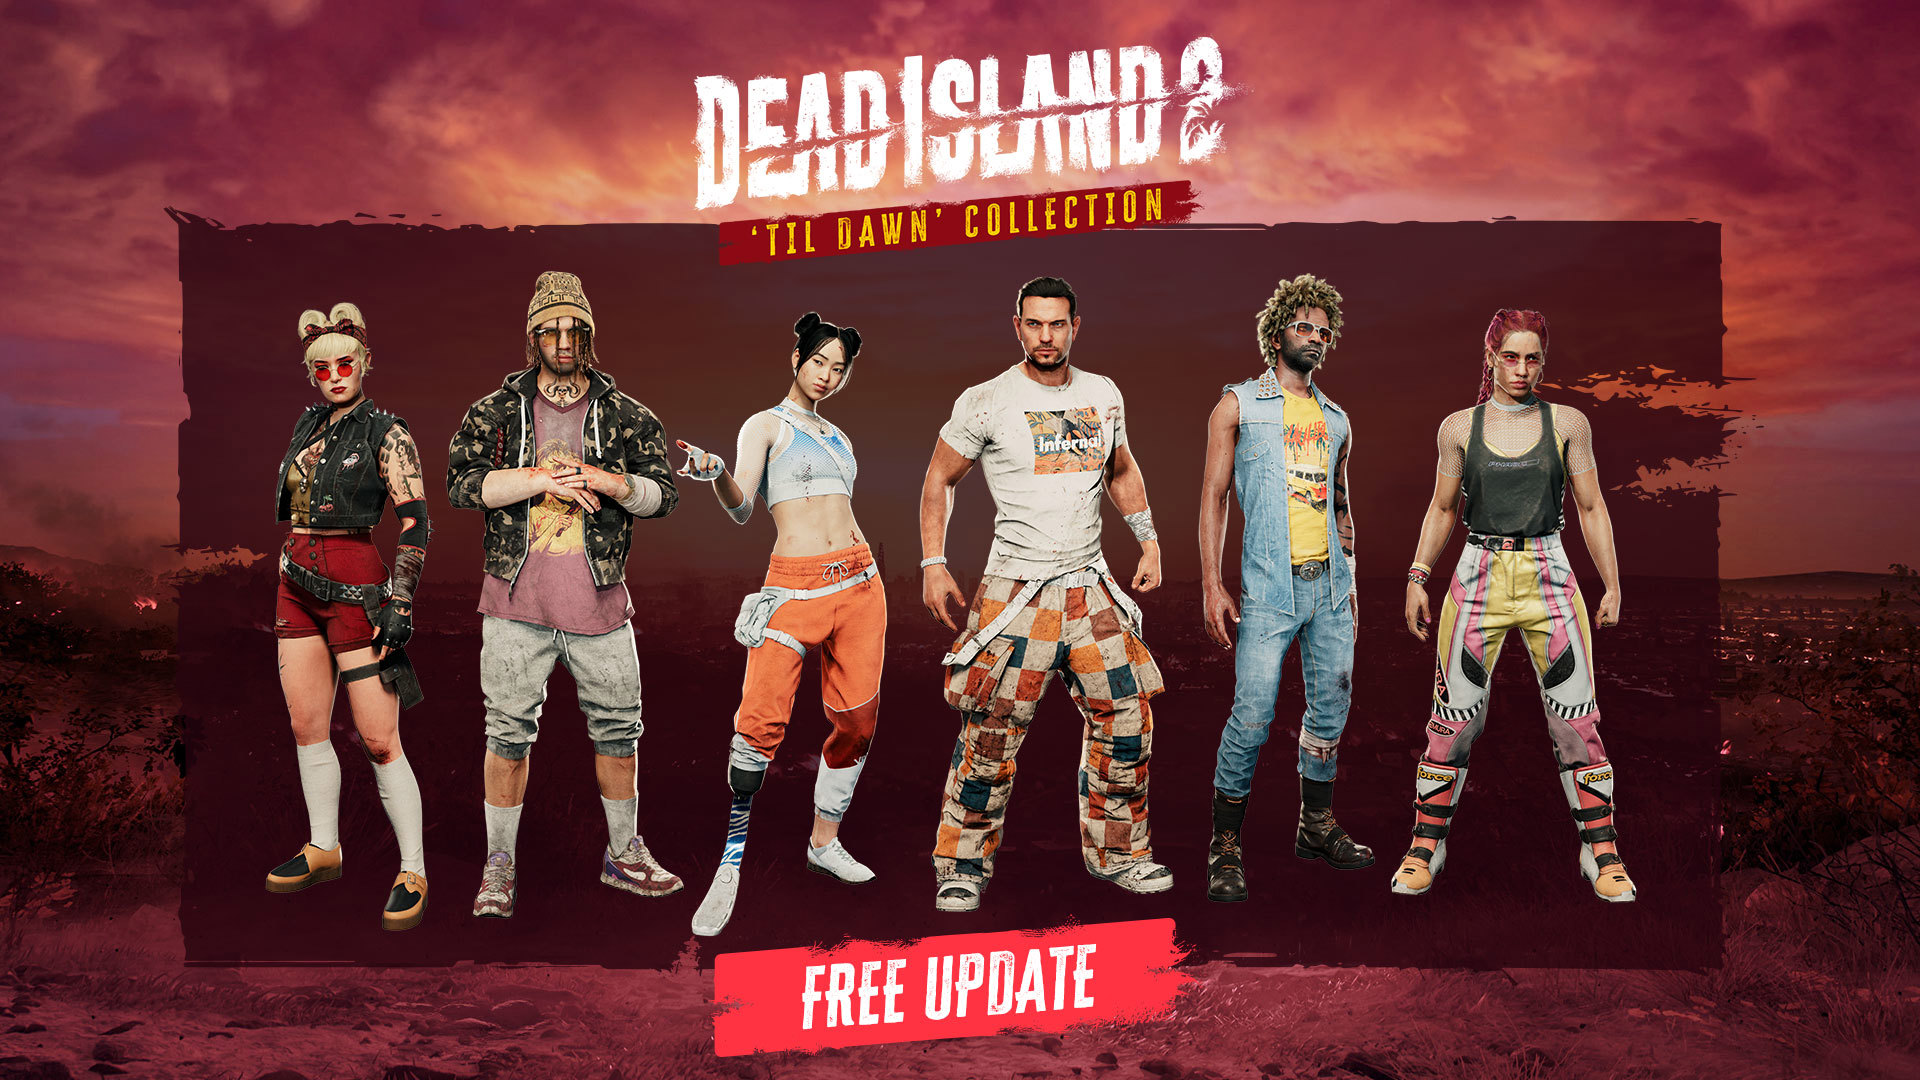 Can you play Dead Island 2 on cloud gaming services?